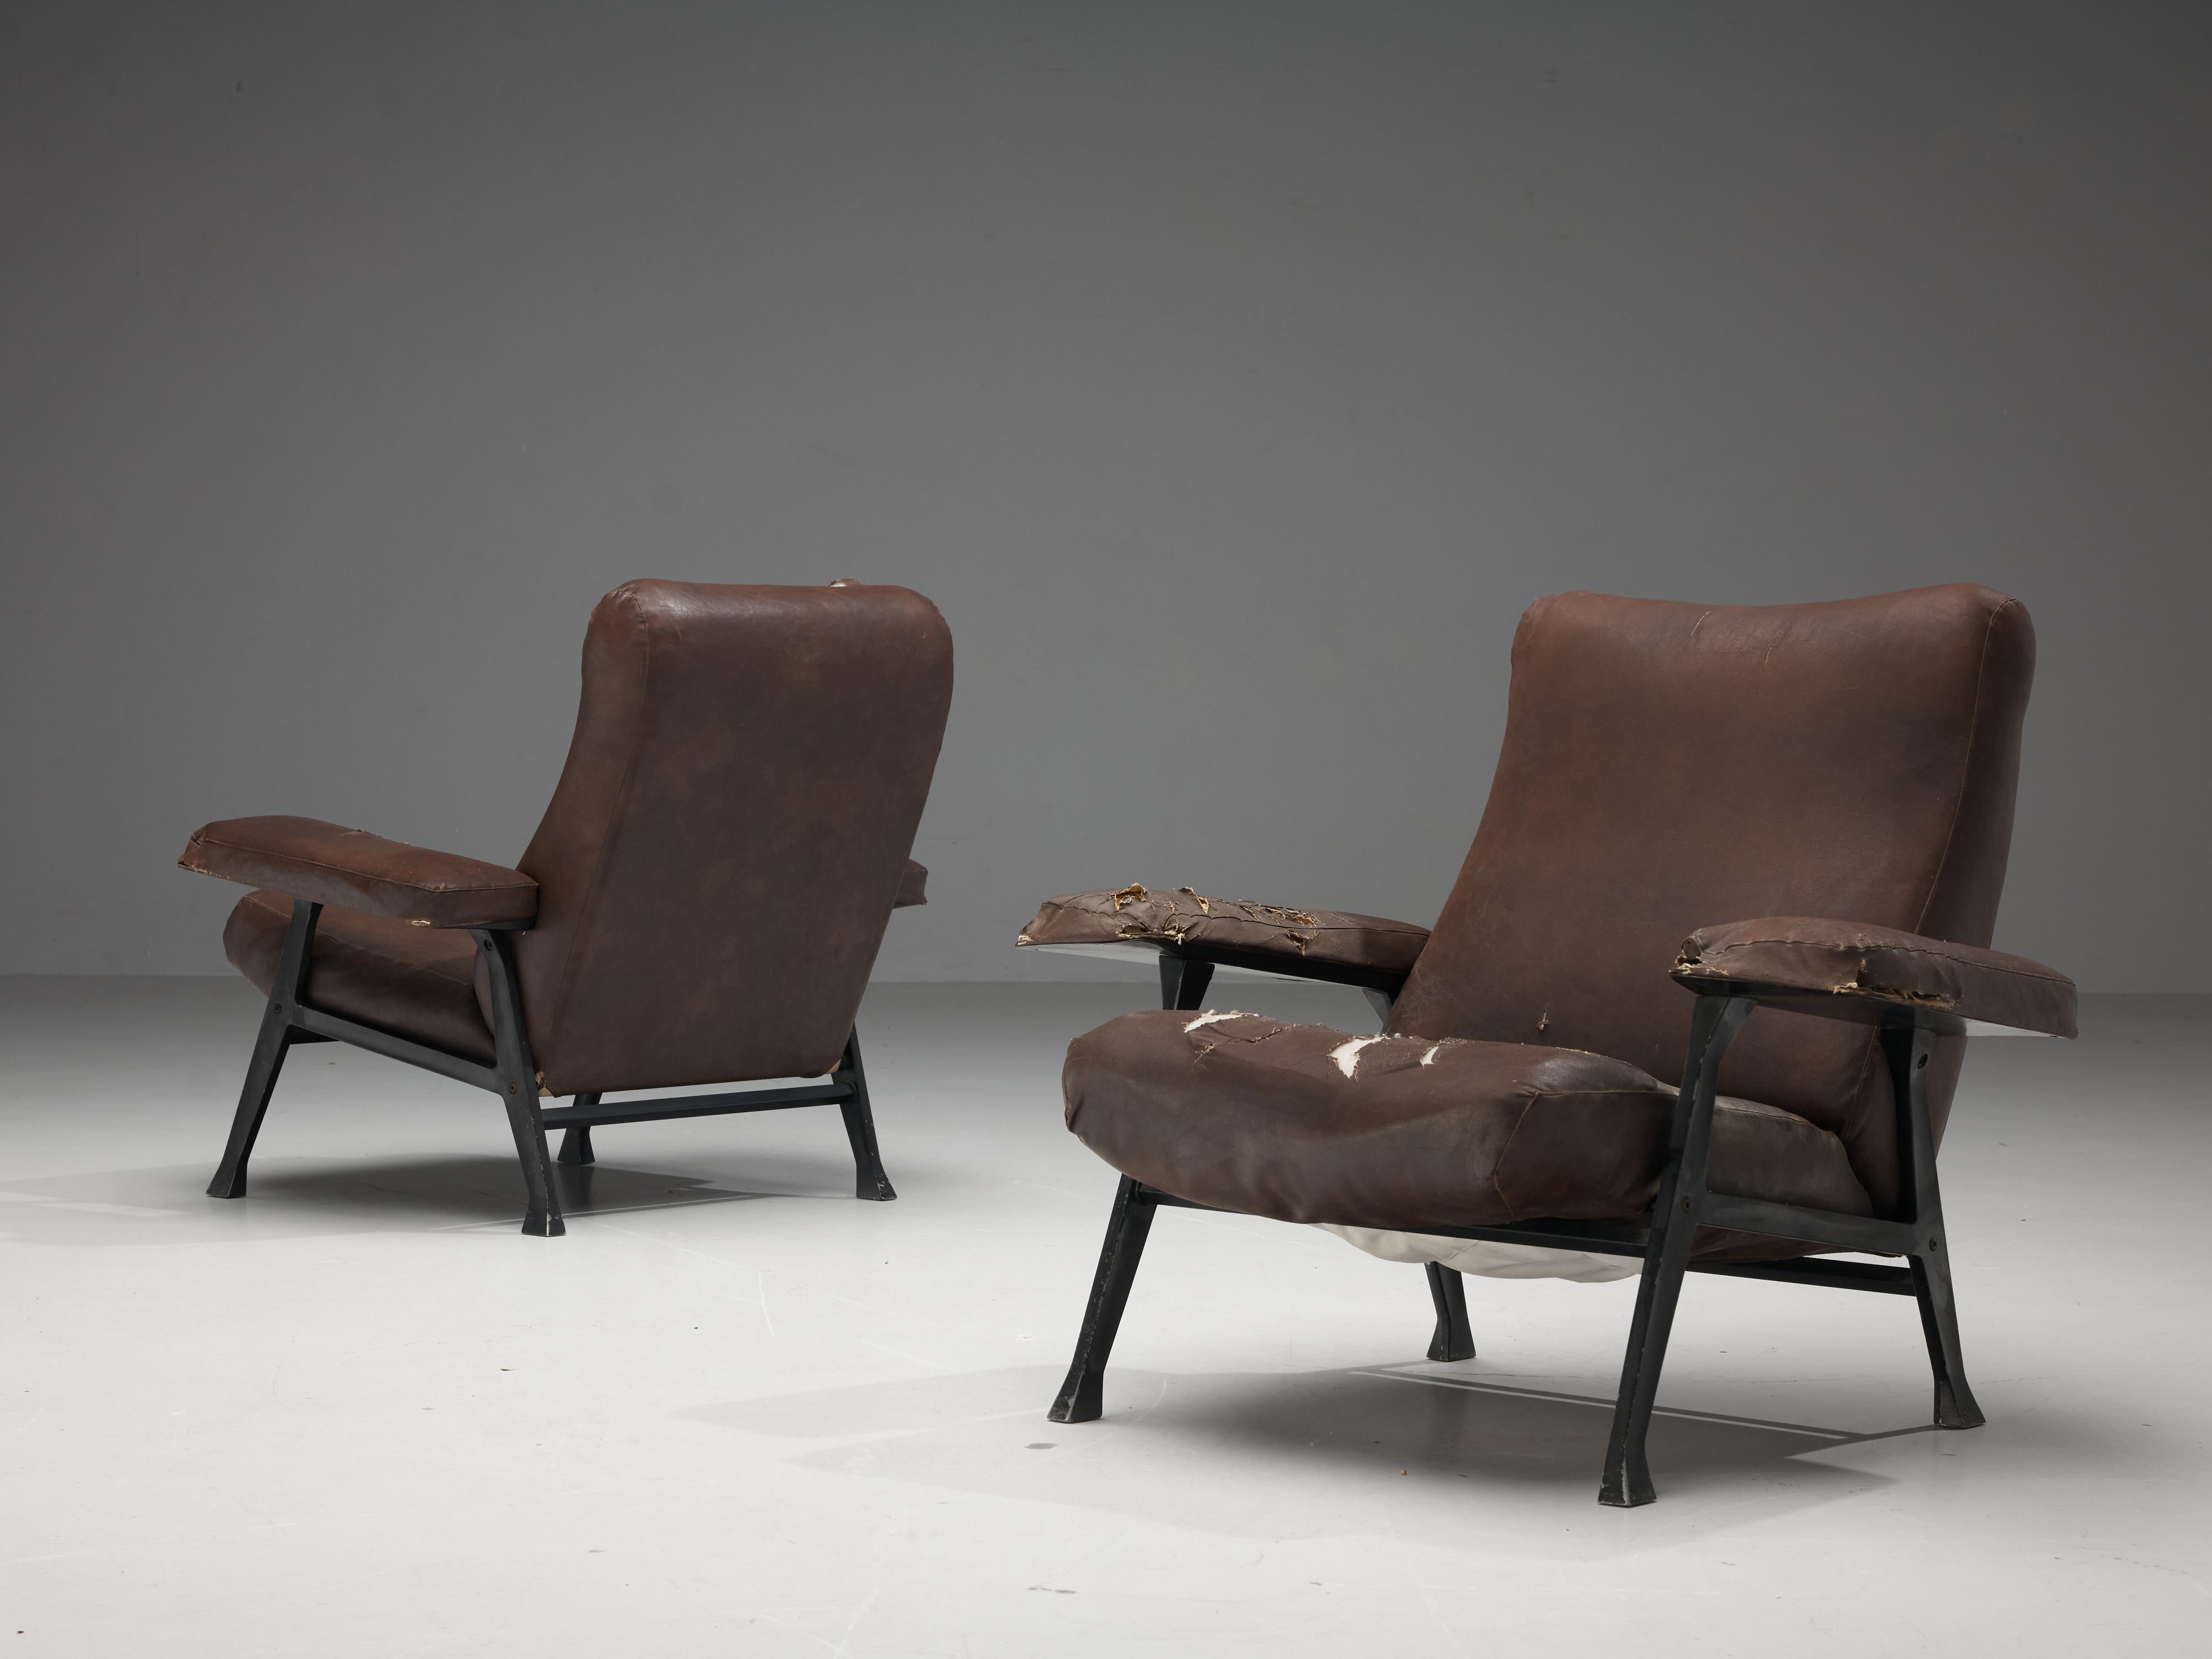 Roberto Menghi for Arflex, pair of ‘Hall’ lounge chairs, metal, faux leather, Italy, 1958

In 1958, Roberto Menghi designs an interesting series of armchairs and sofas for Arflex. The designer titled the designs as the ‘Hall’ collection. A year